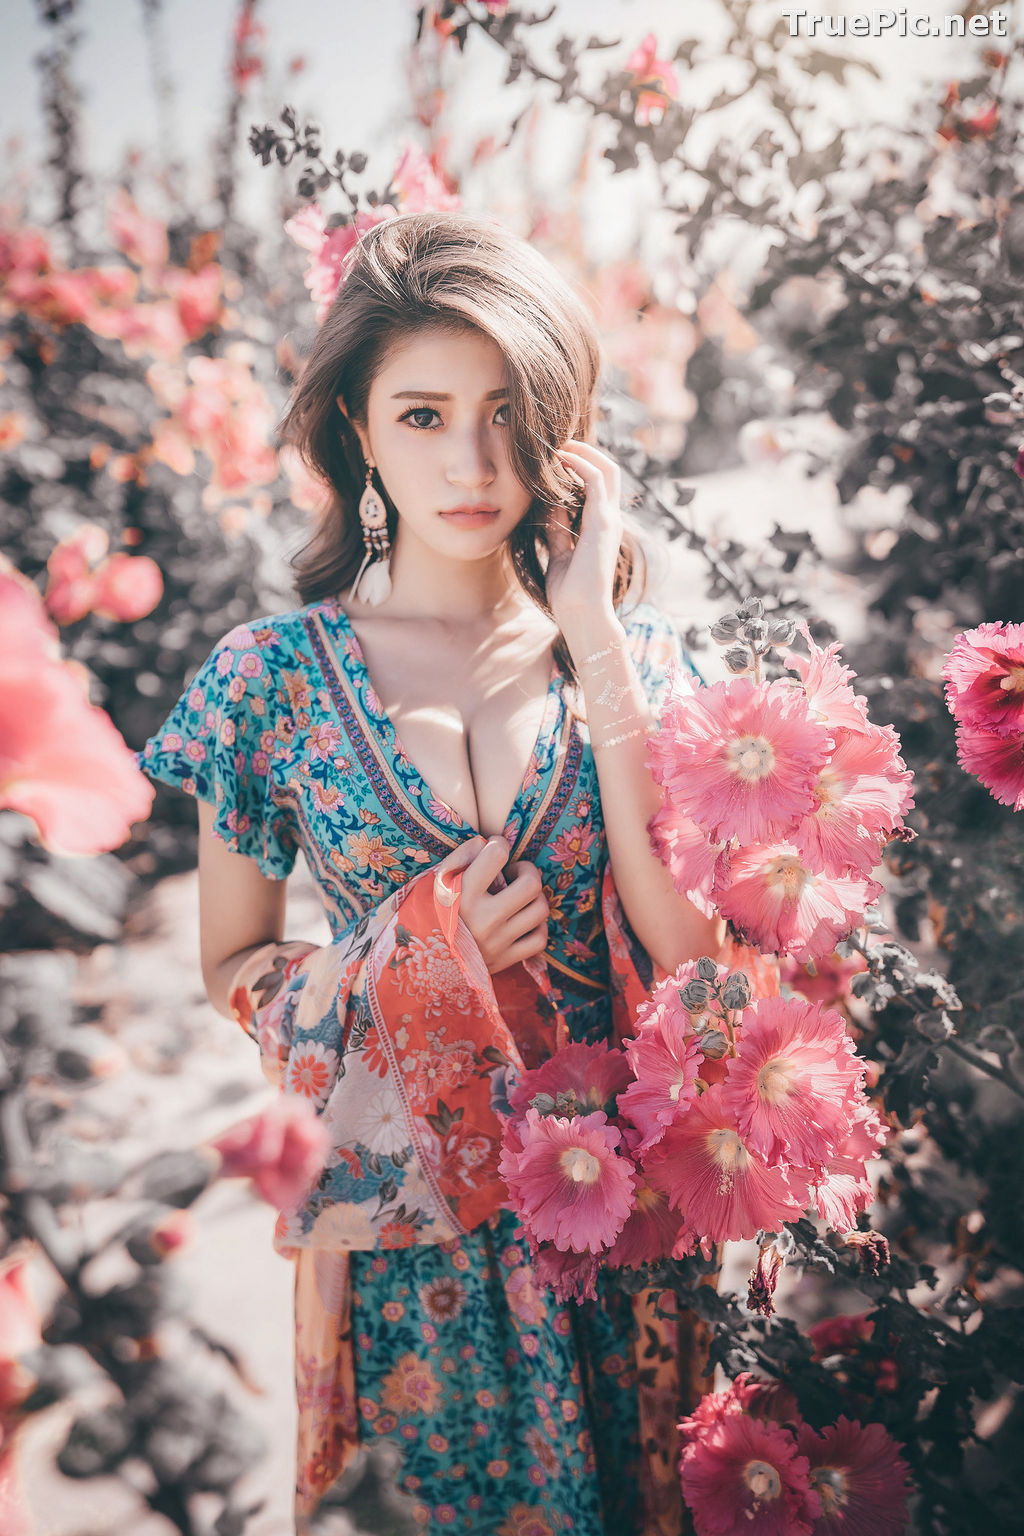 Image Taiwanese Model - 珈伊Femi - Sexy Beautiful Girl at Hollyhock Garden - TruePic.net - Picture-15